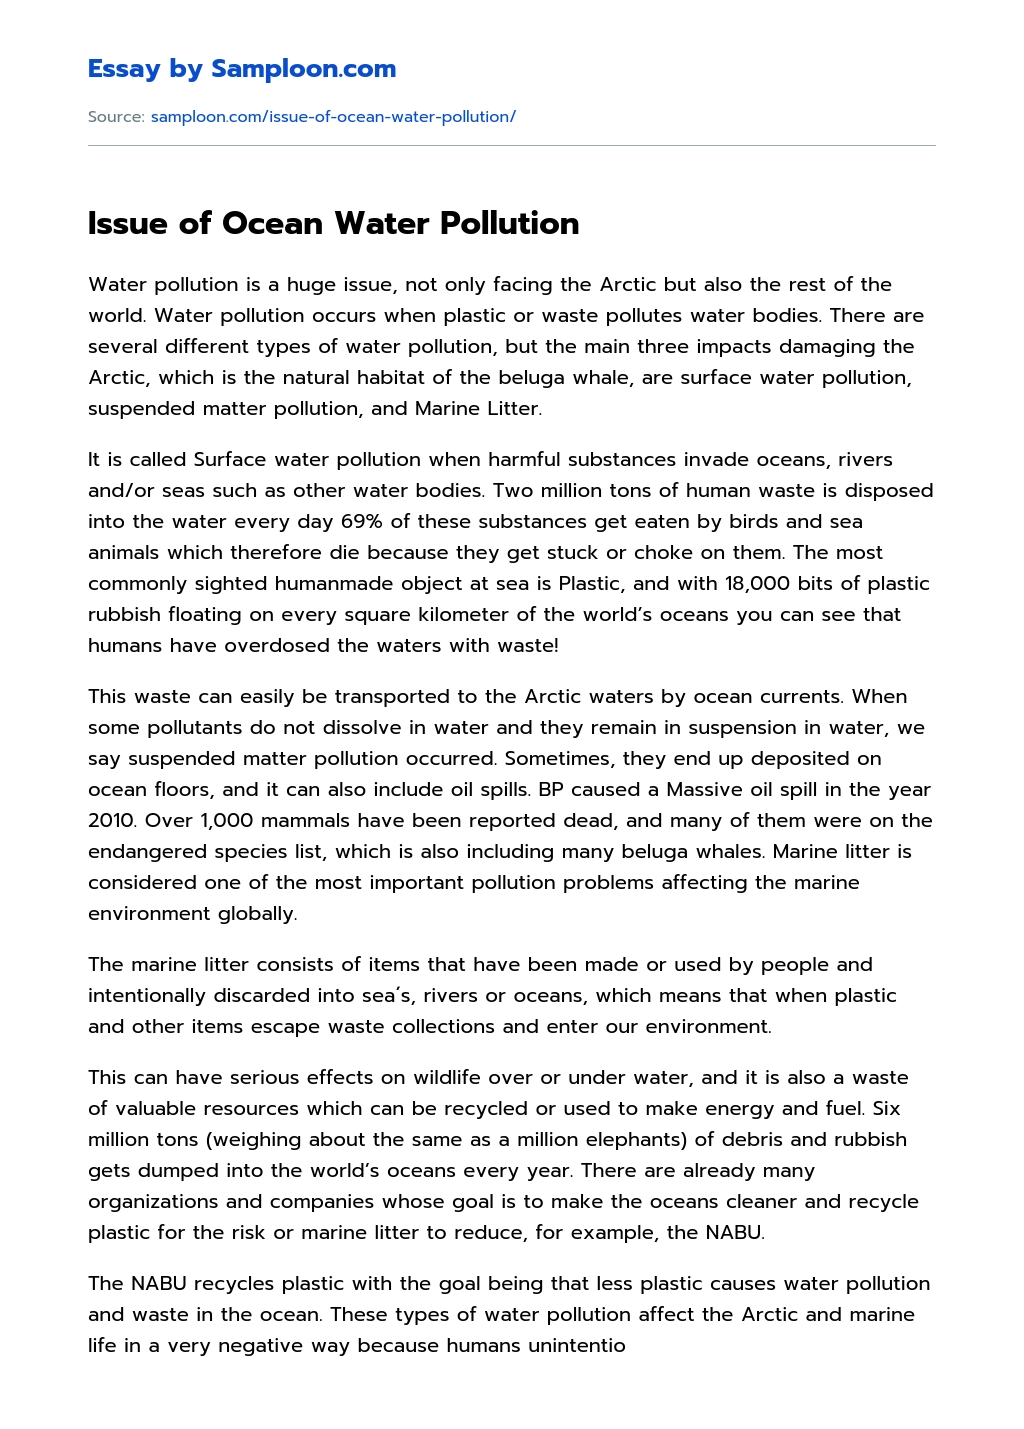 Issue of Ocean Water Pollution essay